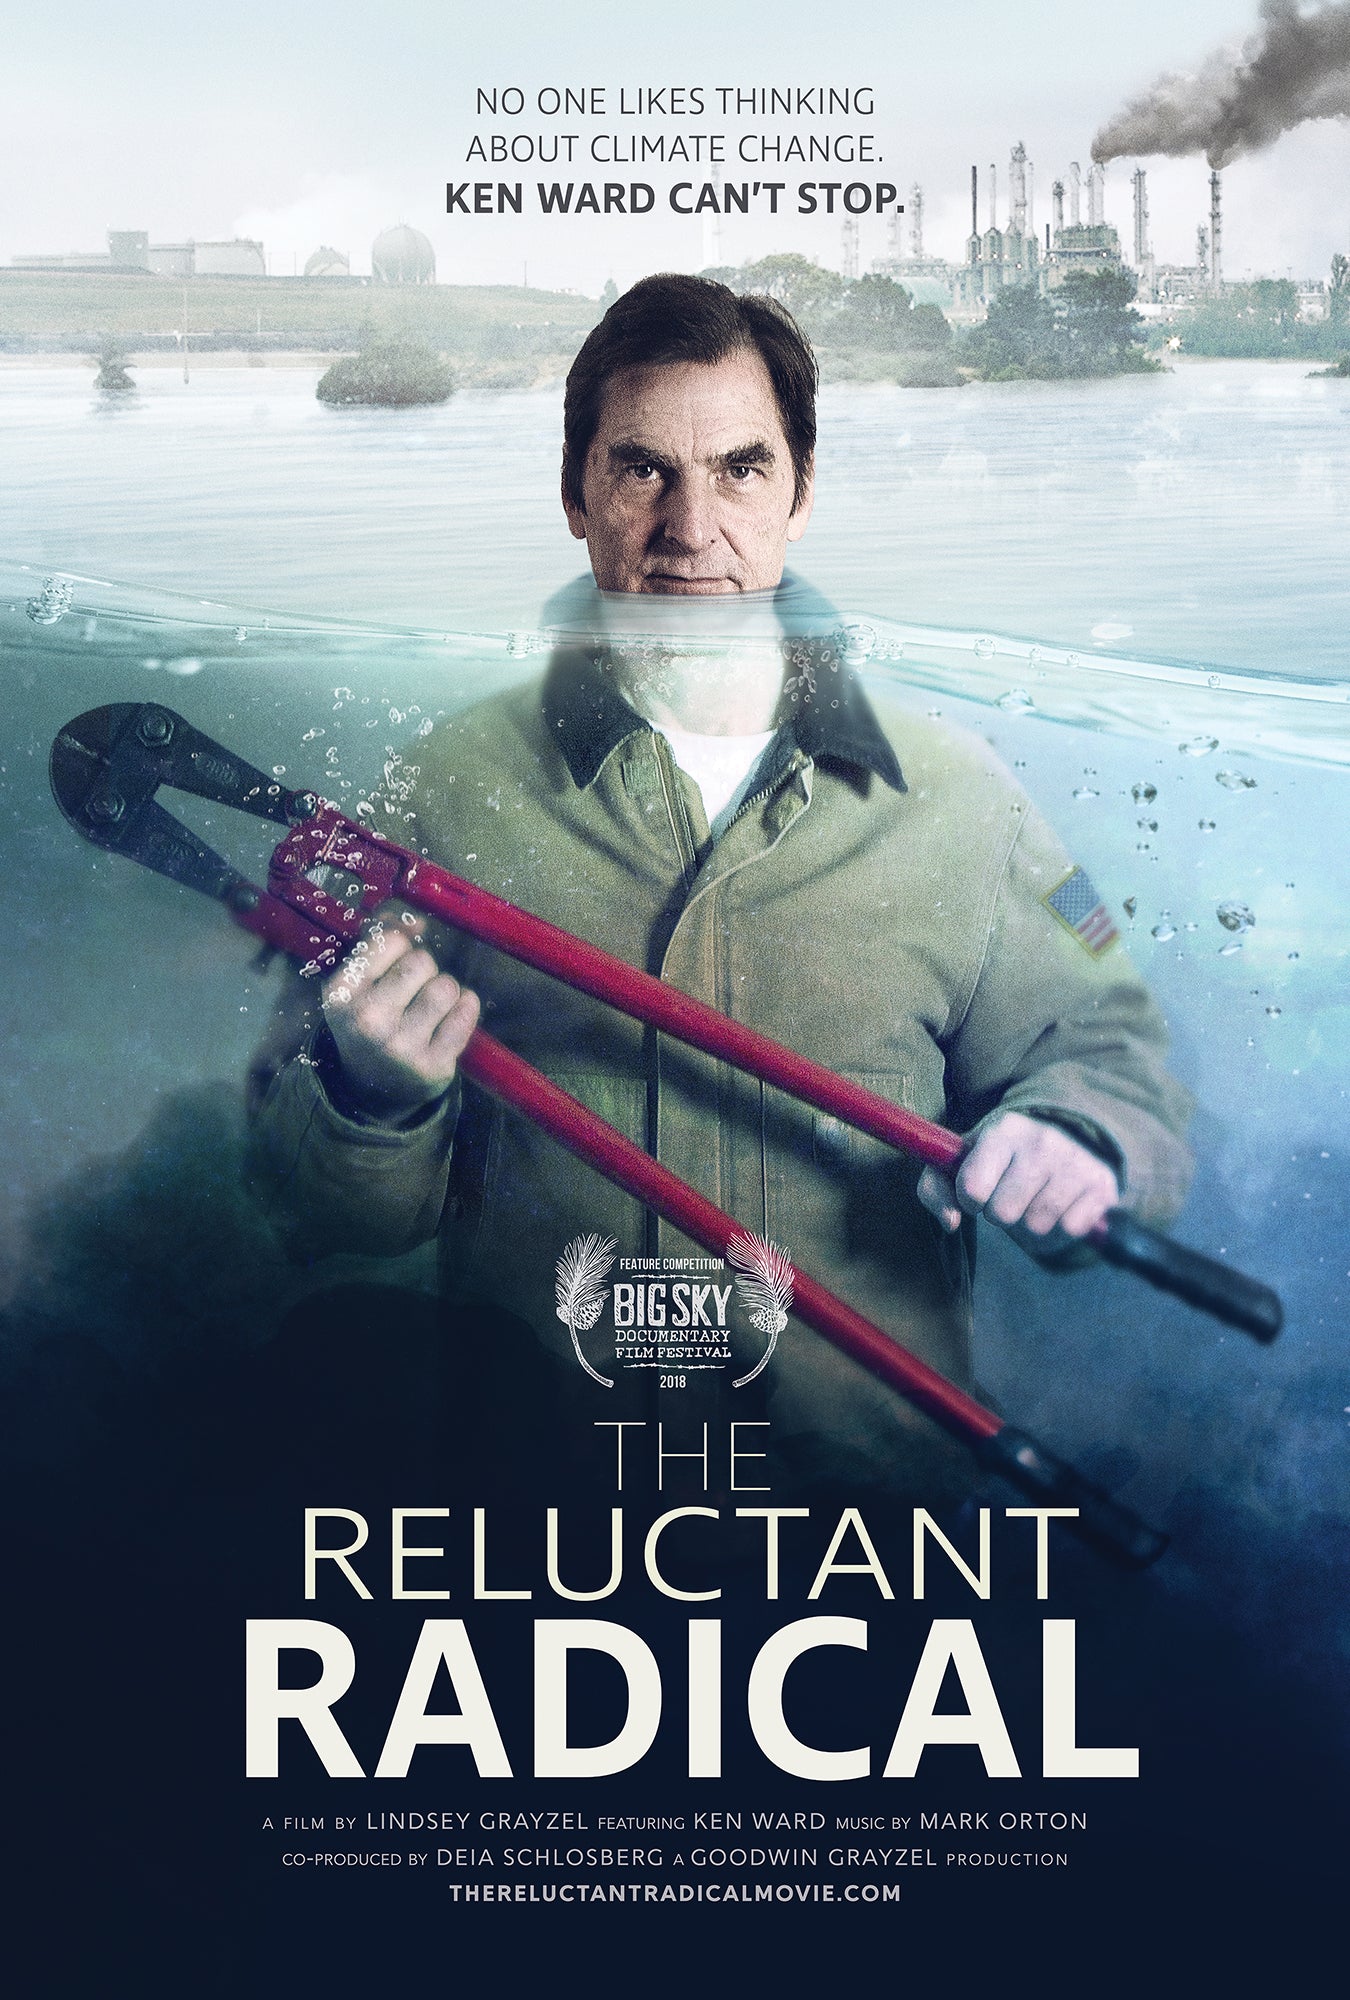 The Reluctant Radical